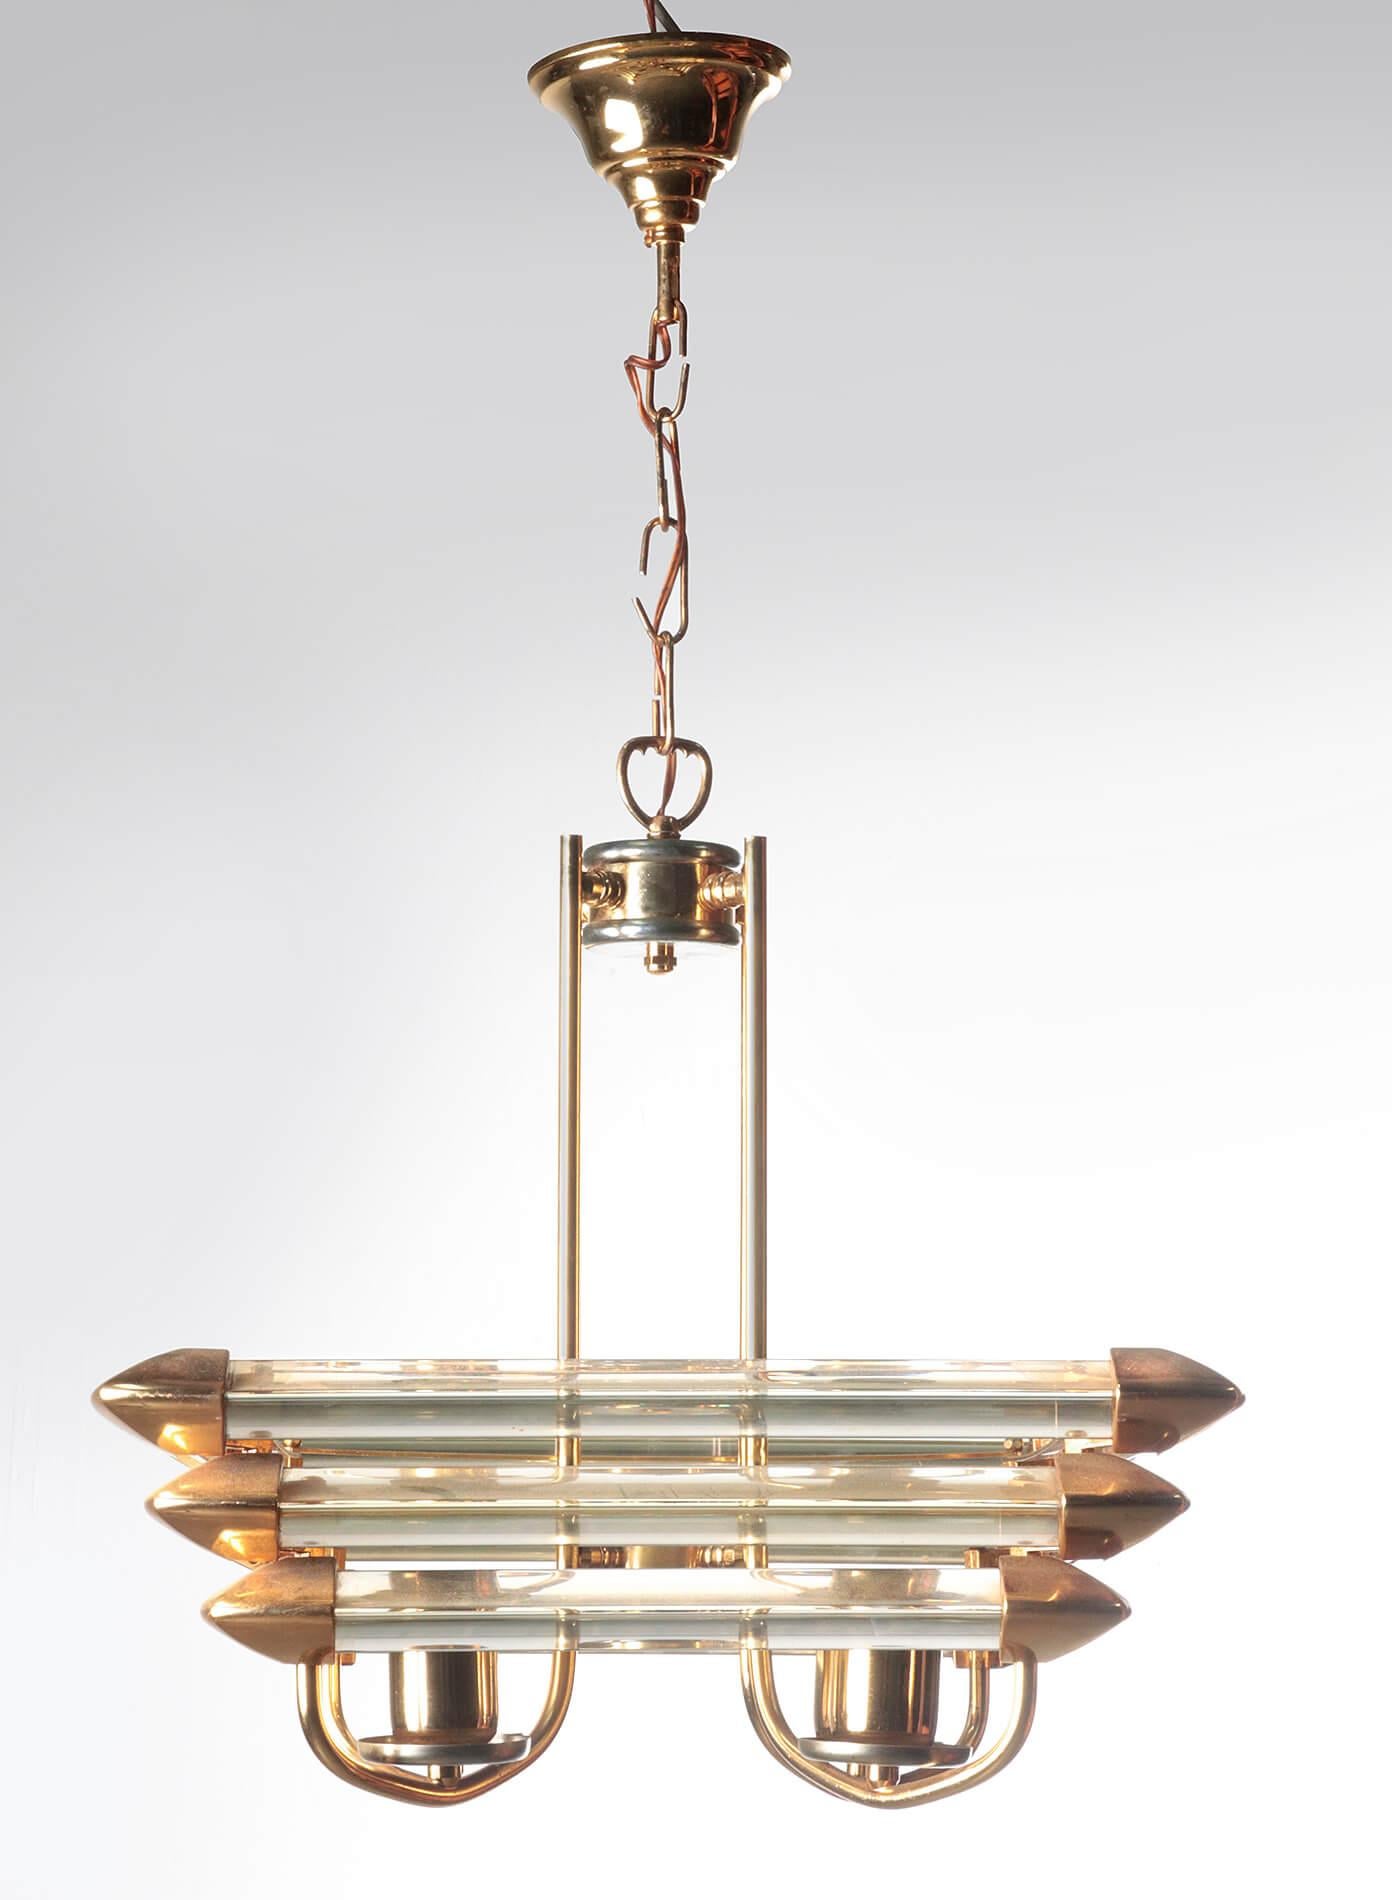 Mid-20th Century Hollywood Regency Lamp with Prism Glass